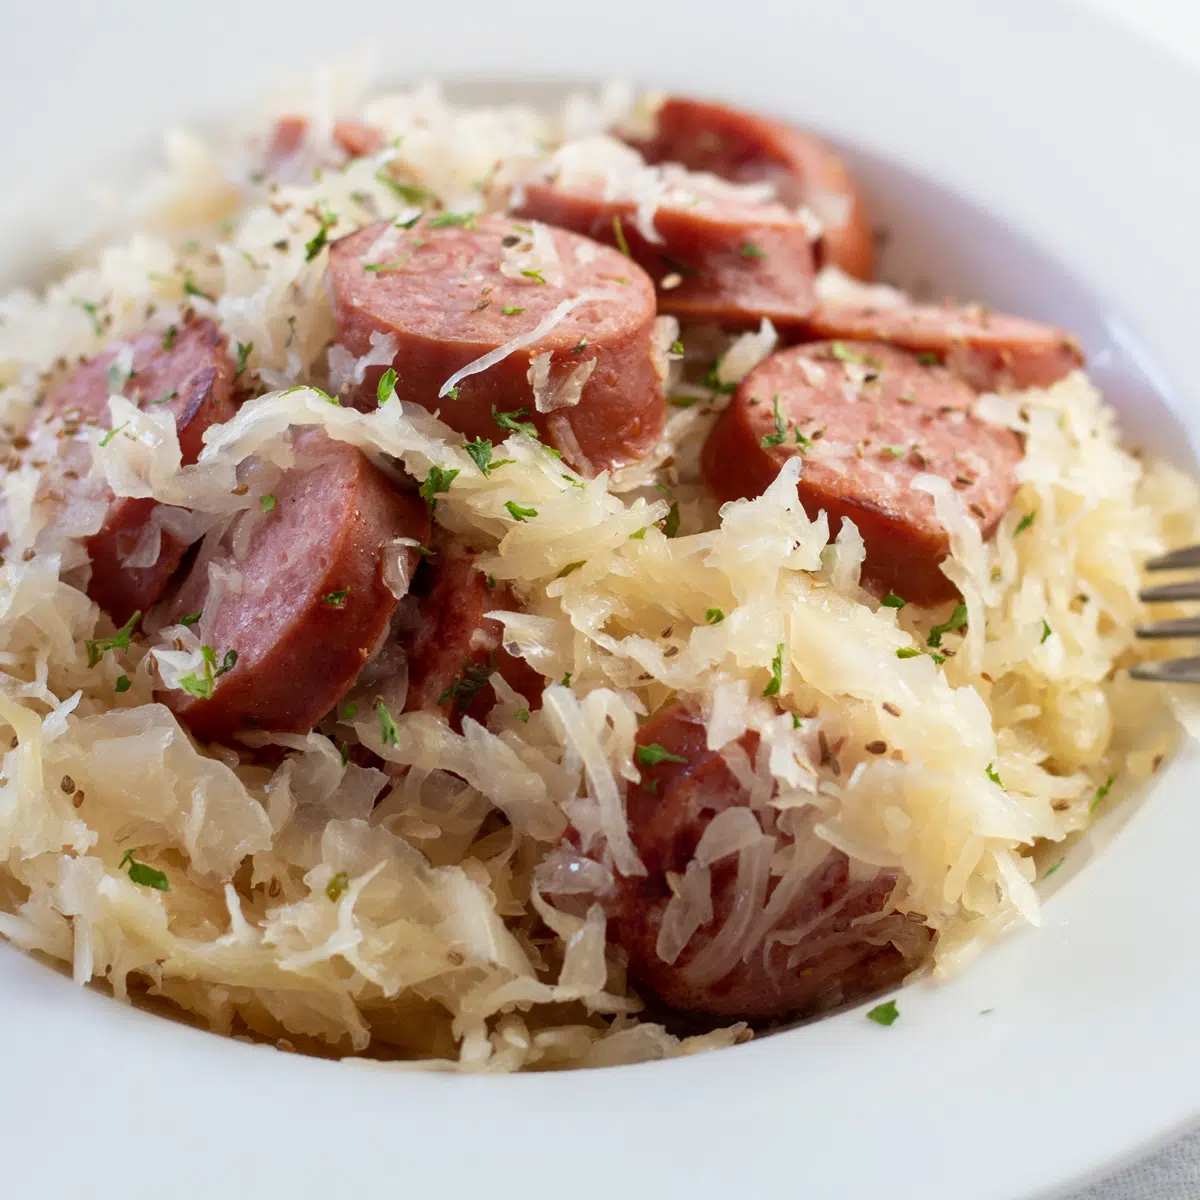 Tasty slow cooker kielbasa and sauerkraut is served up ready to eat in a white bowl.